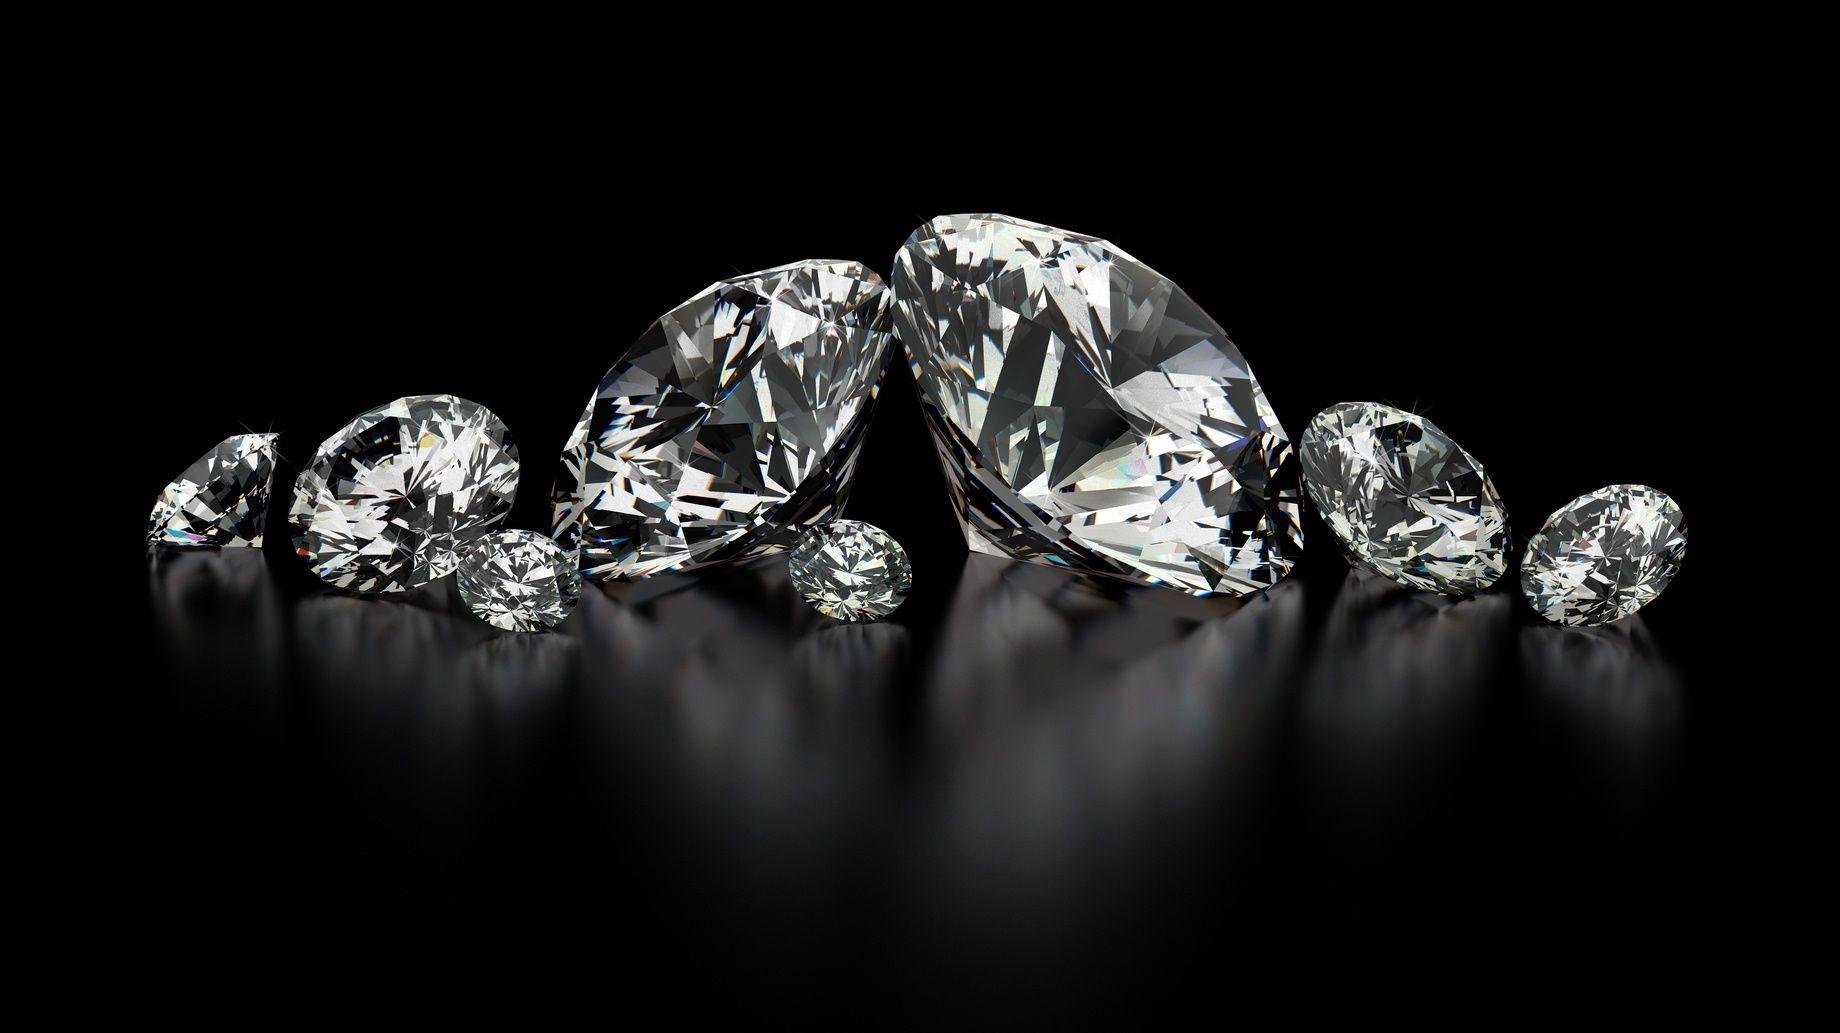 Diamonds in Nagaland? Very likely, say scientists. WeForNews